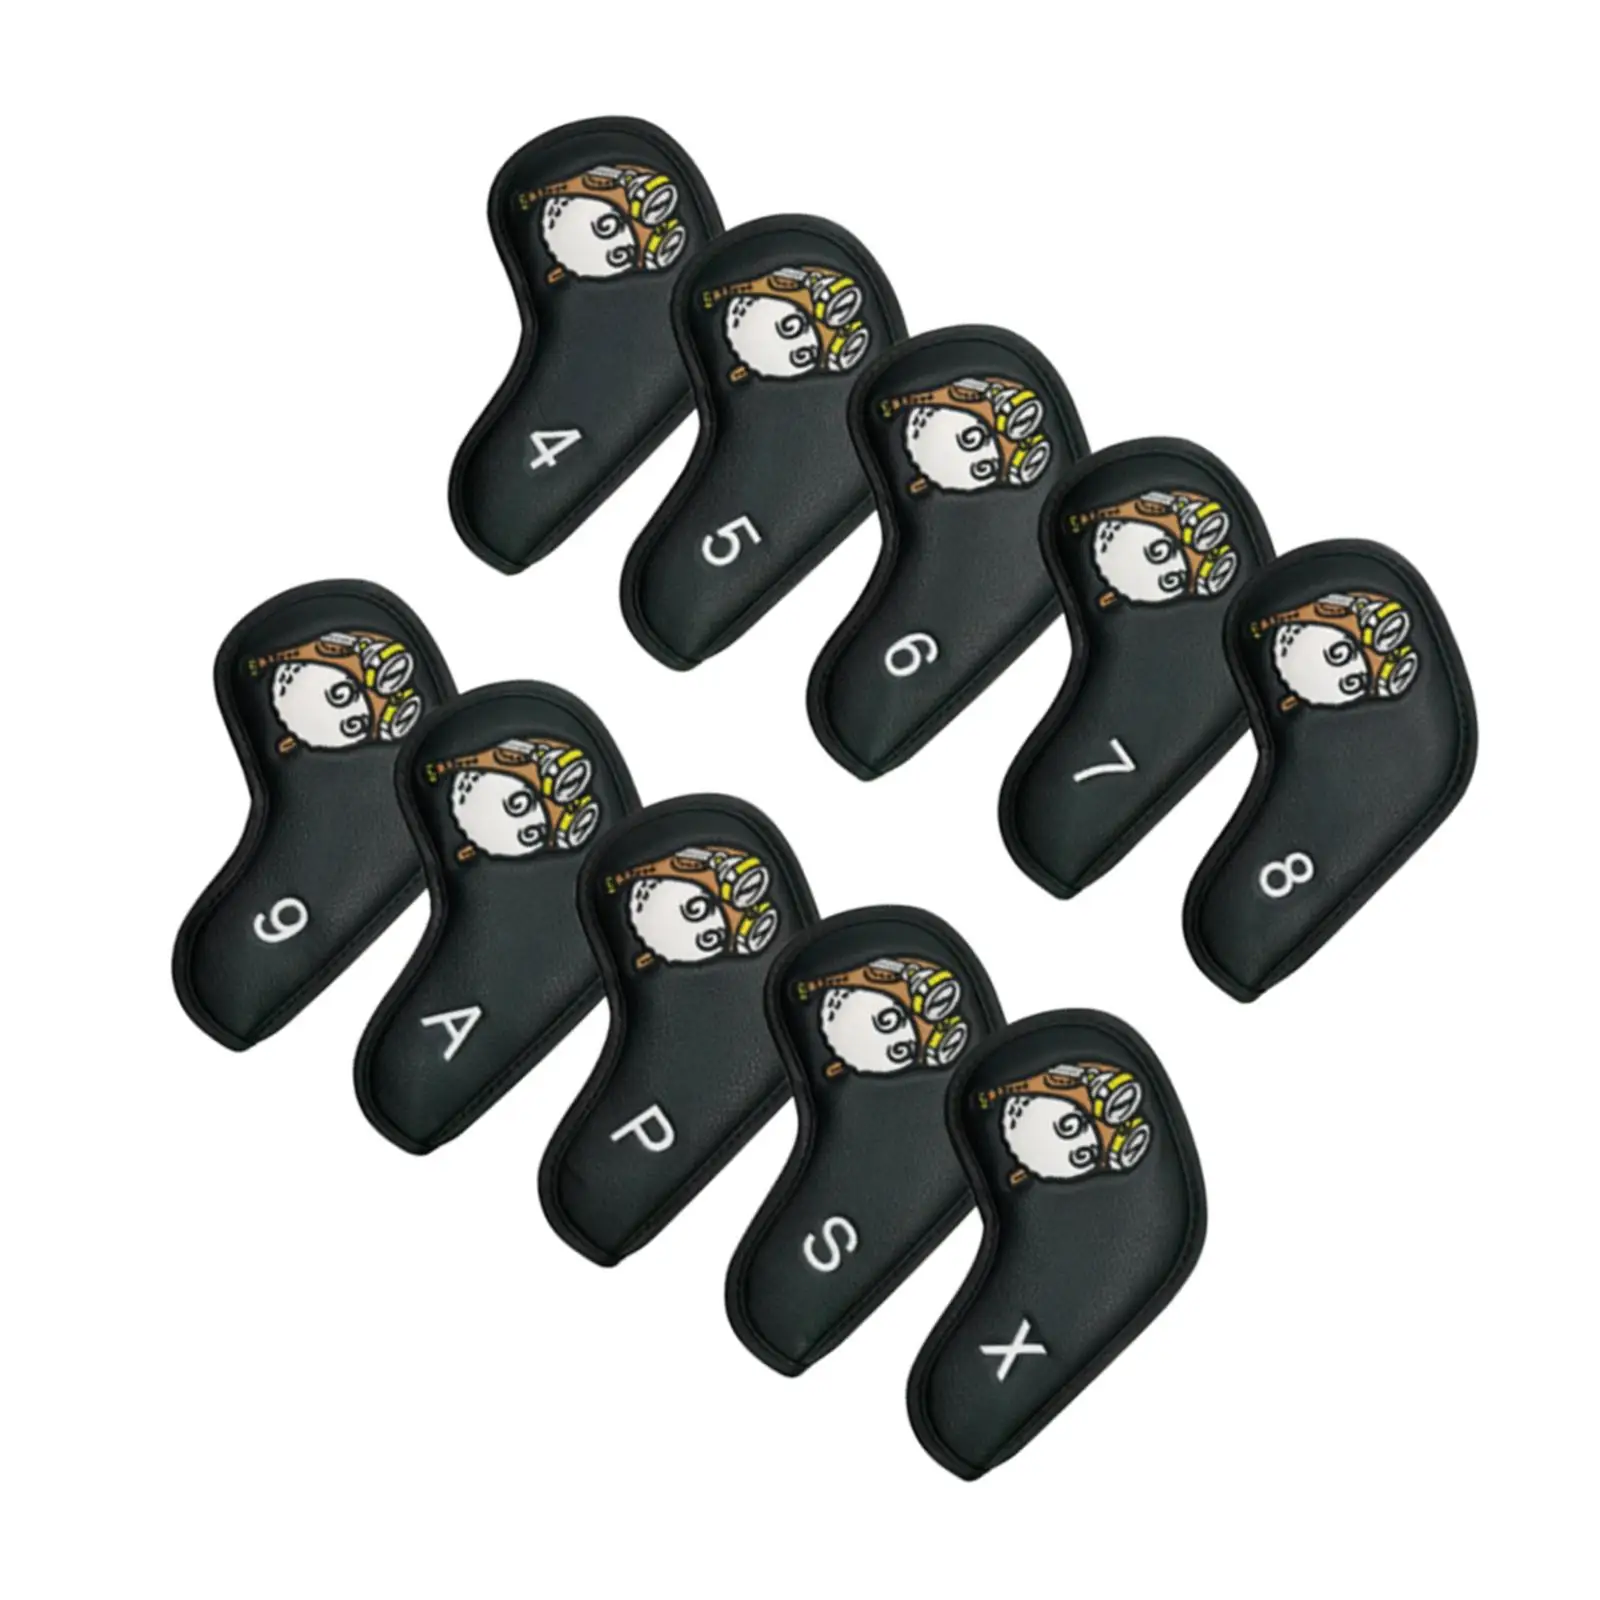 10 Pieces Golf Iron Head Covers Pilots Pattern 4-9,A P,S,x golfs Iron Headcover PU Leather Water Resistant Men Women Protector